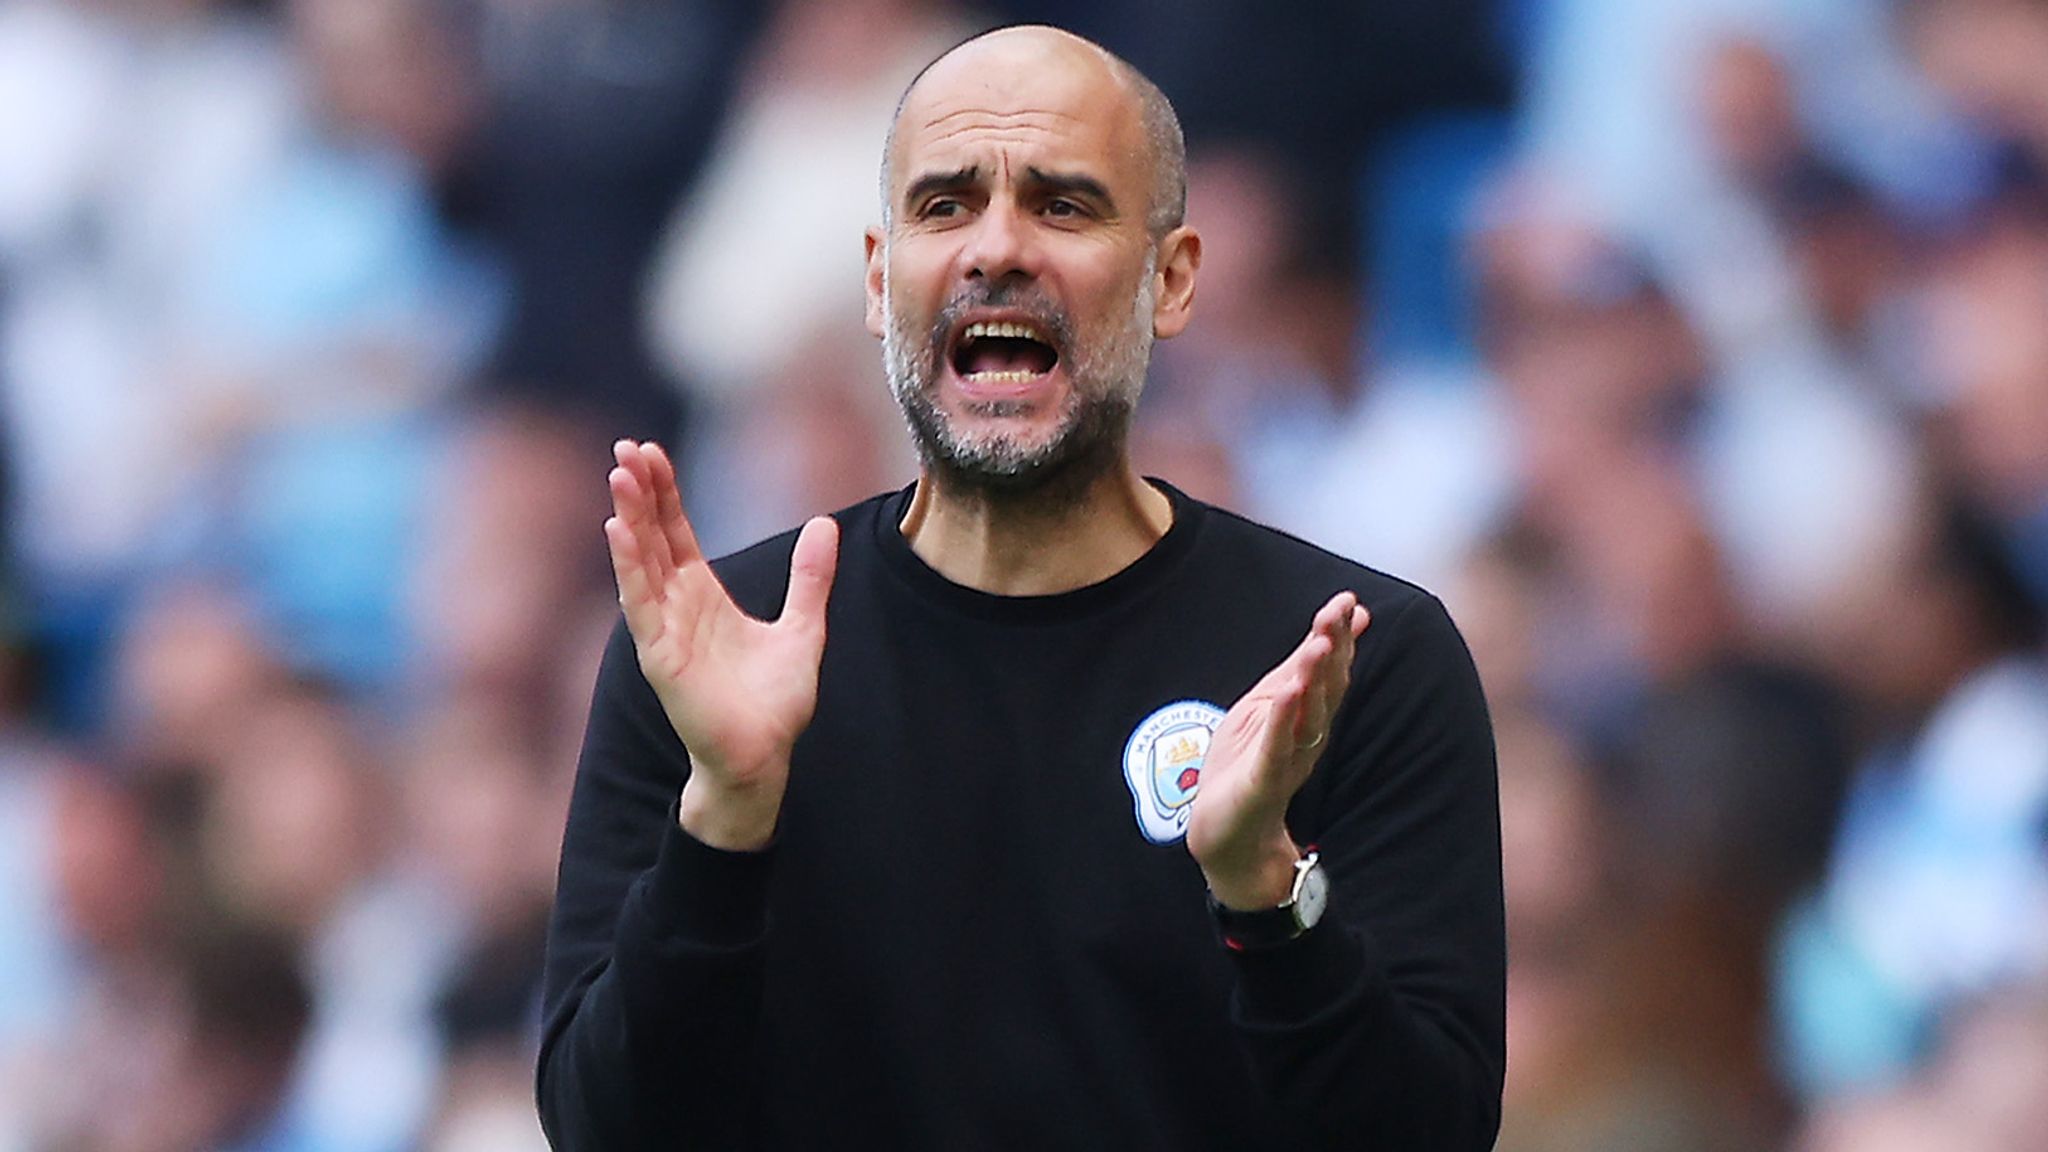 Pep Guardiola claims 'everyone supports Liverpool' as Manchester City face injury crisis with Ruben Dias, John Stones and Kyle Walker out for season | Football News | Sky Sports